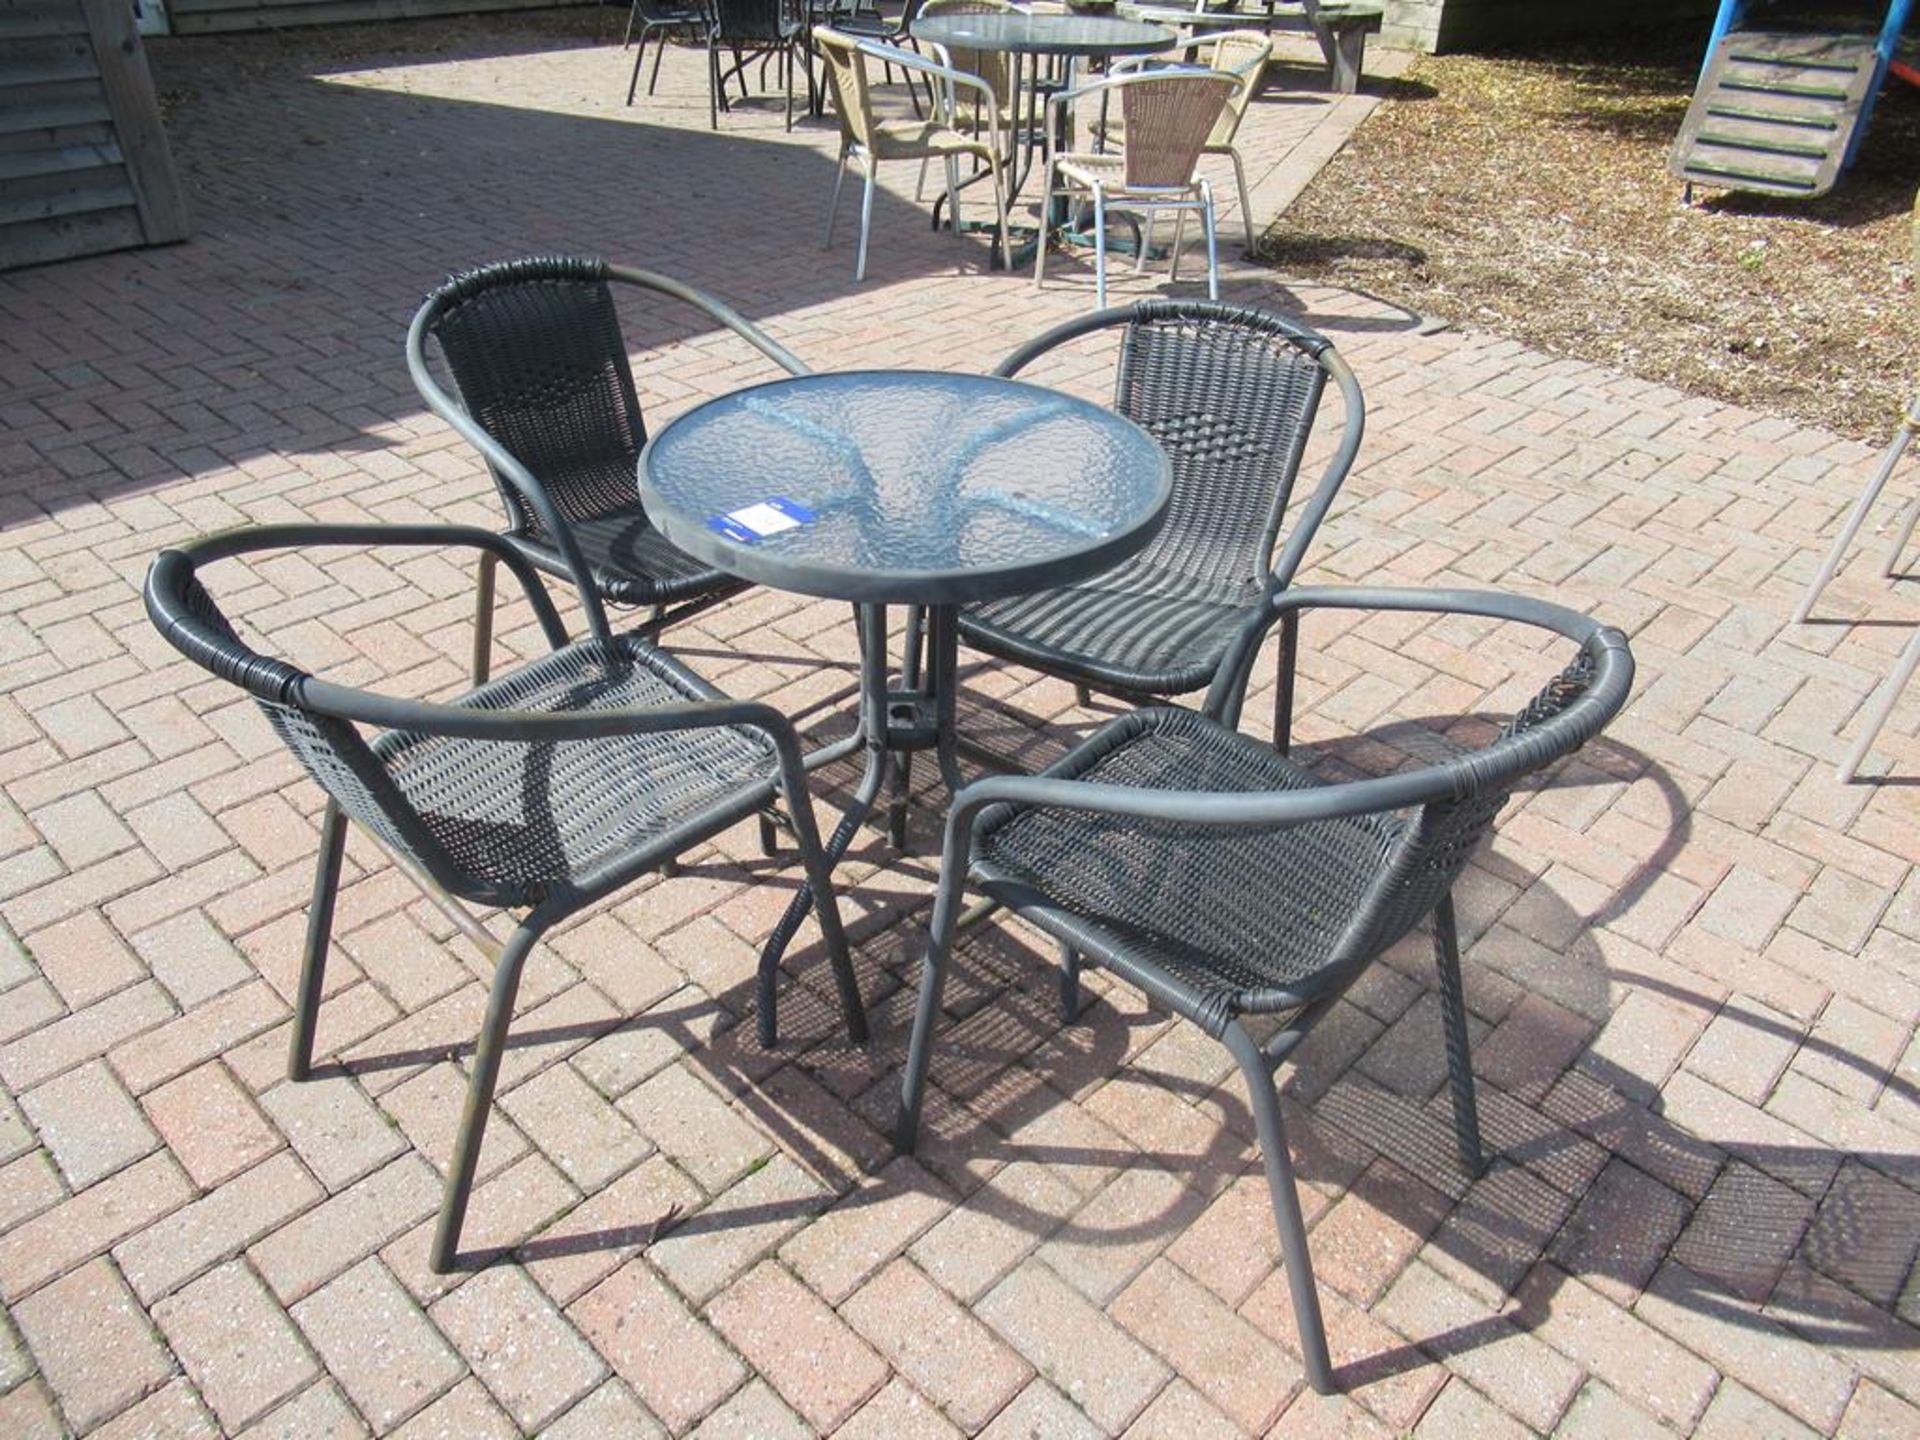 Metal Framed Circular Glass Top Garden Table with 4 x Metal Framed Garden Chairs - Image 2 of 4